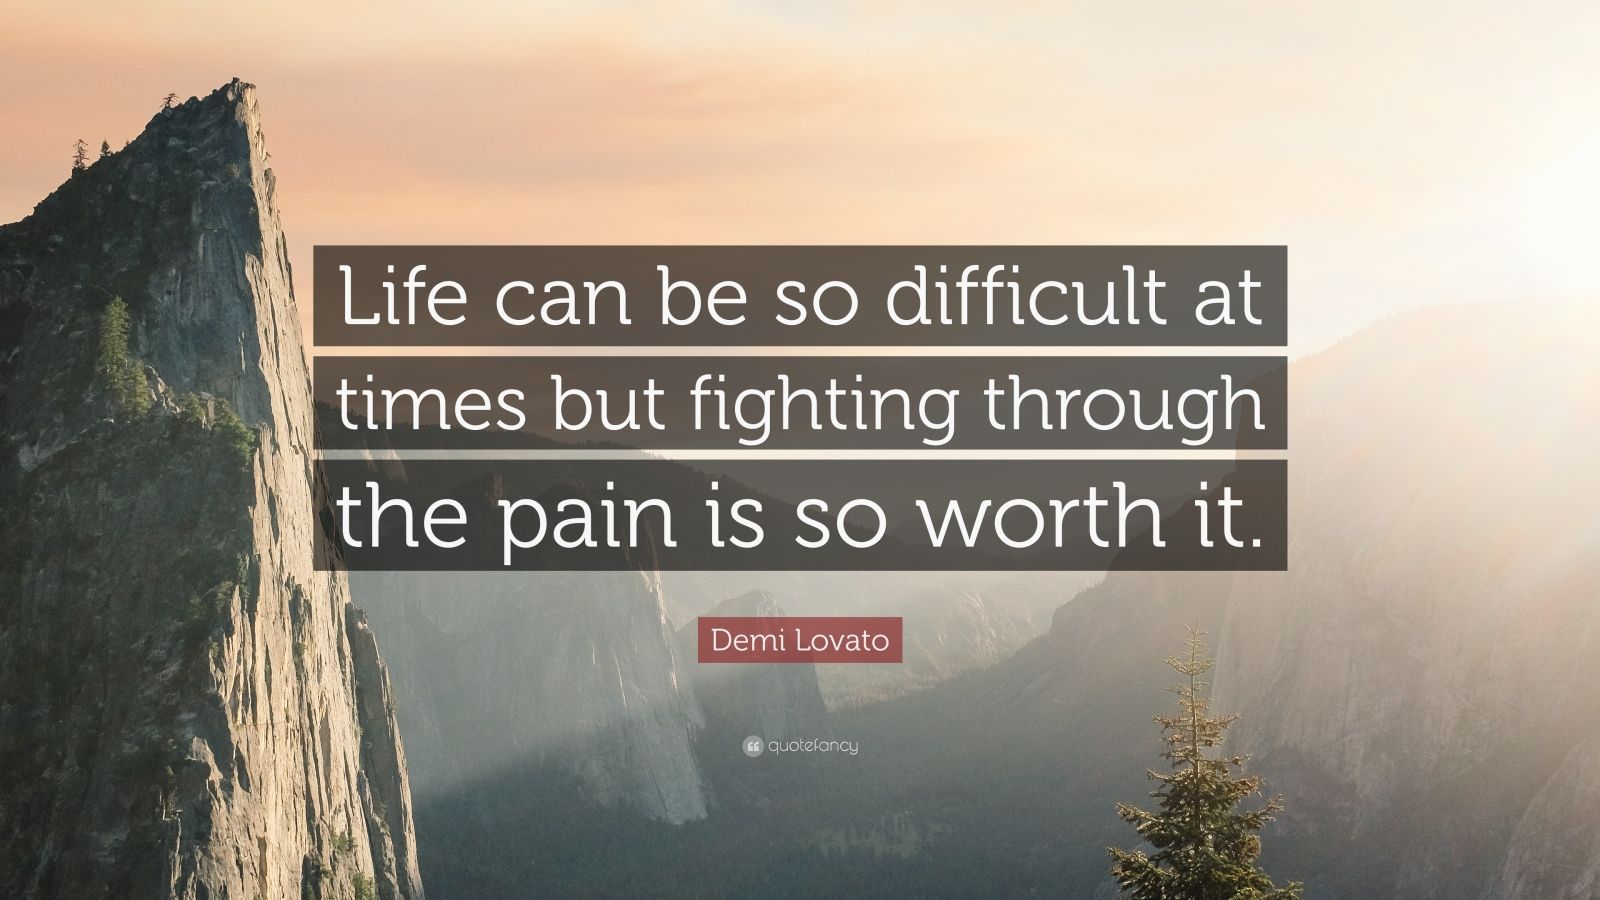 Demi Lovato Quote “Life can be so difficult at times but